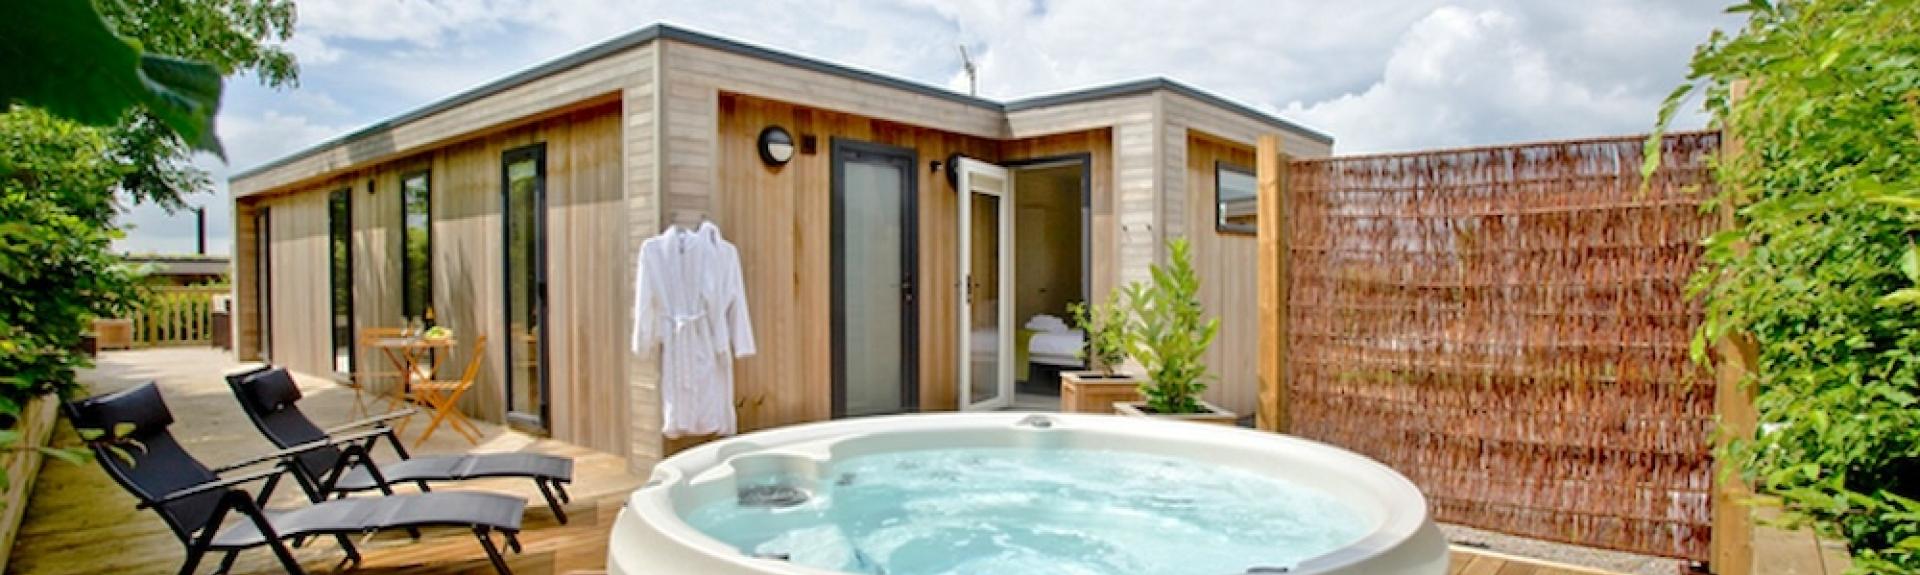 Exterior of a wooden eco lodge with a hot tub on its deck.